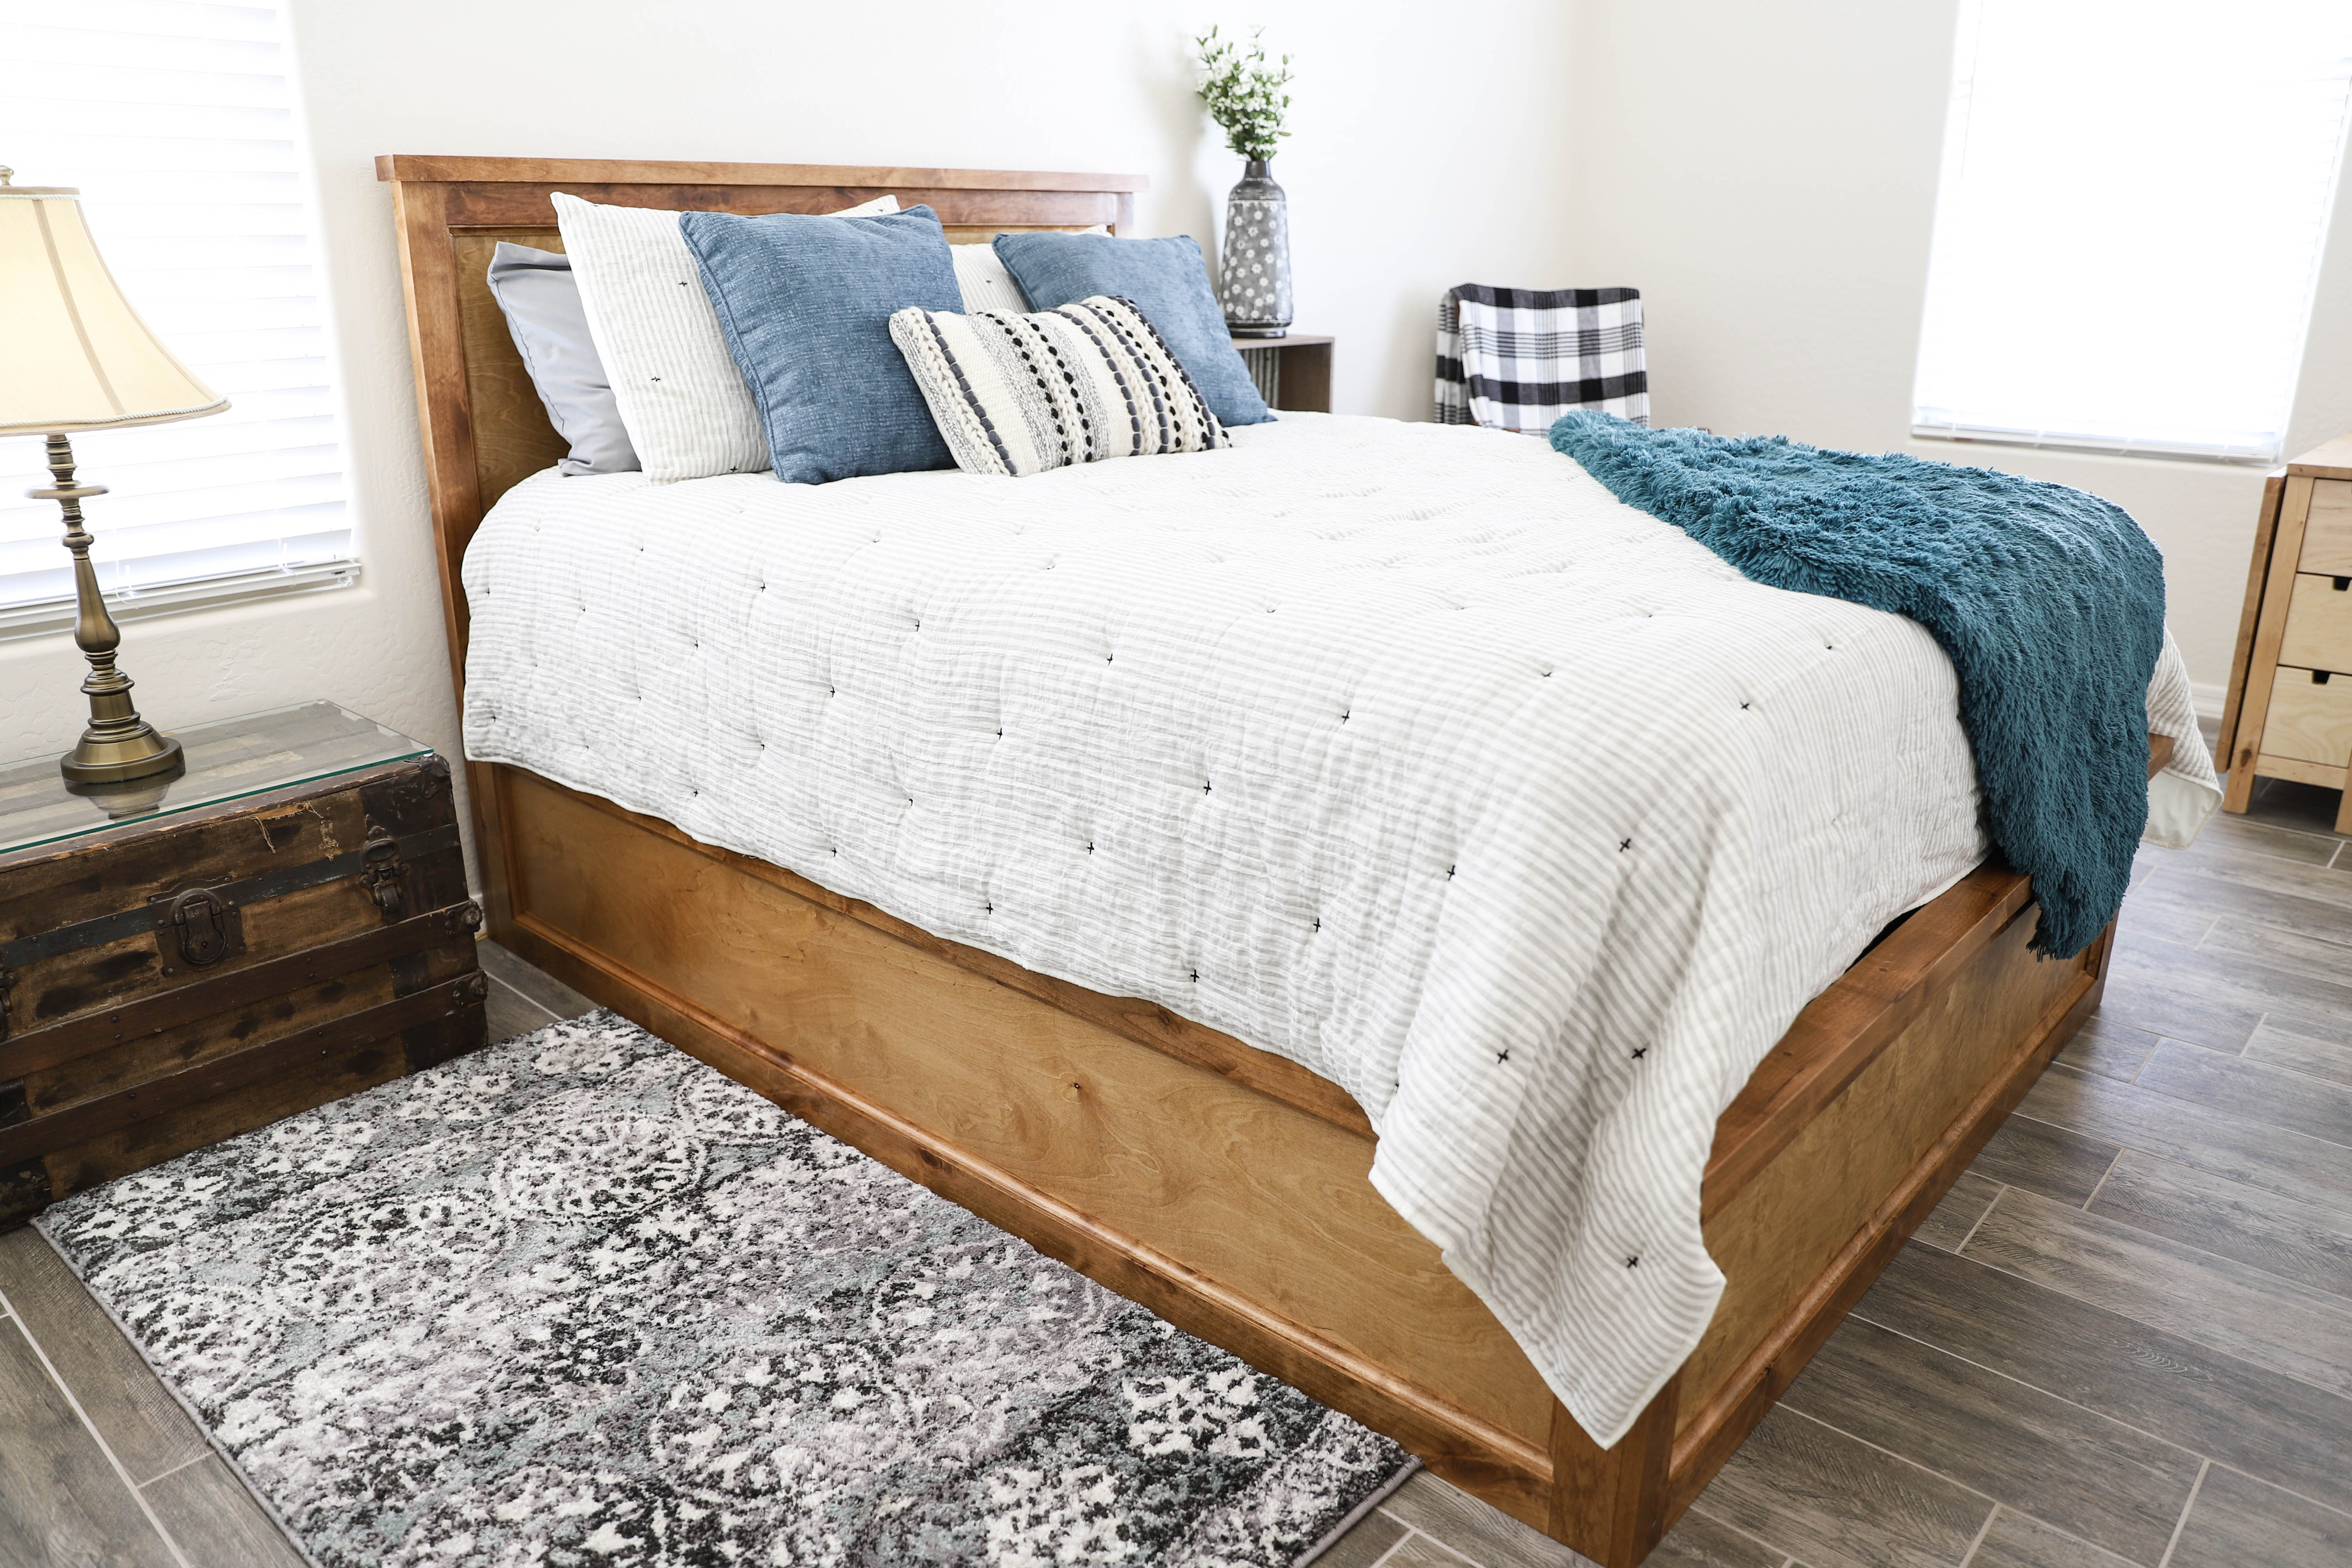 How To Build A Queen Size Storage Bed, Headboard Ideas For Queen Size Beds